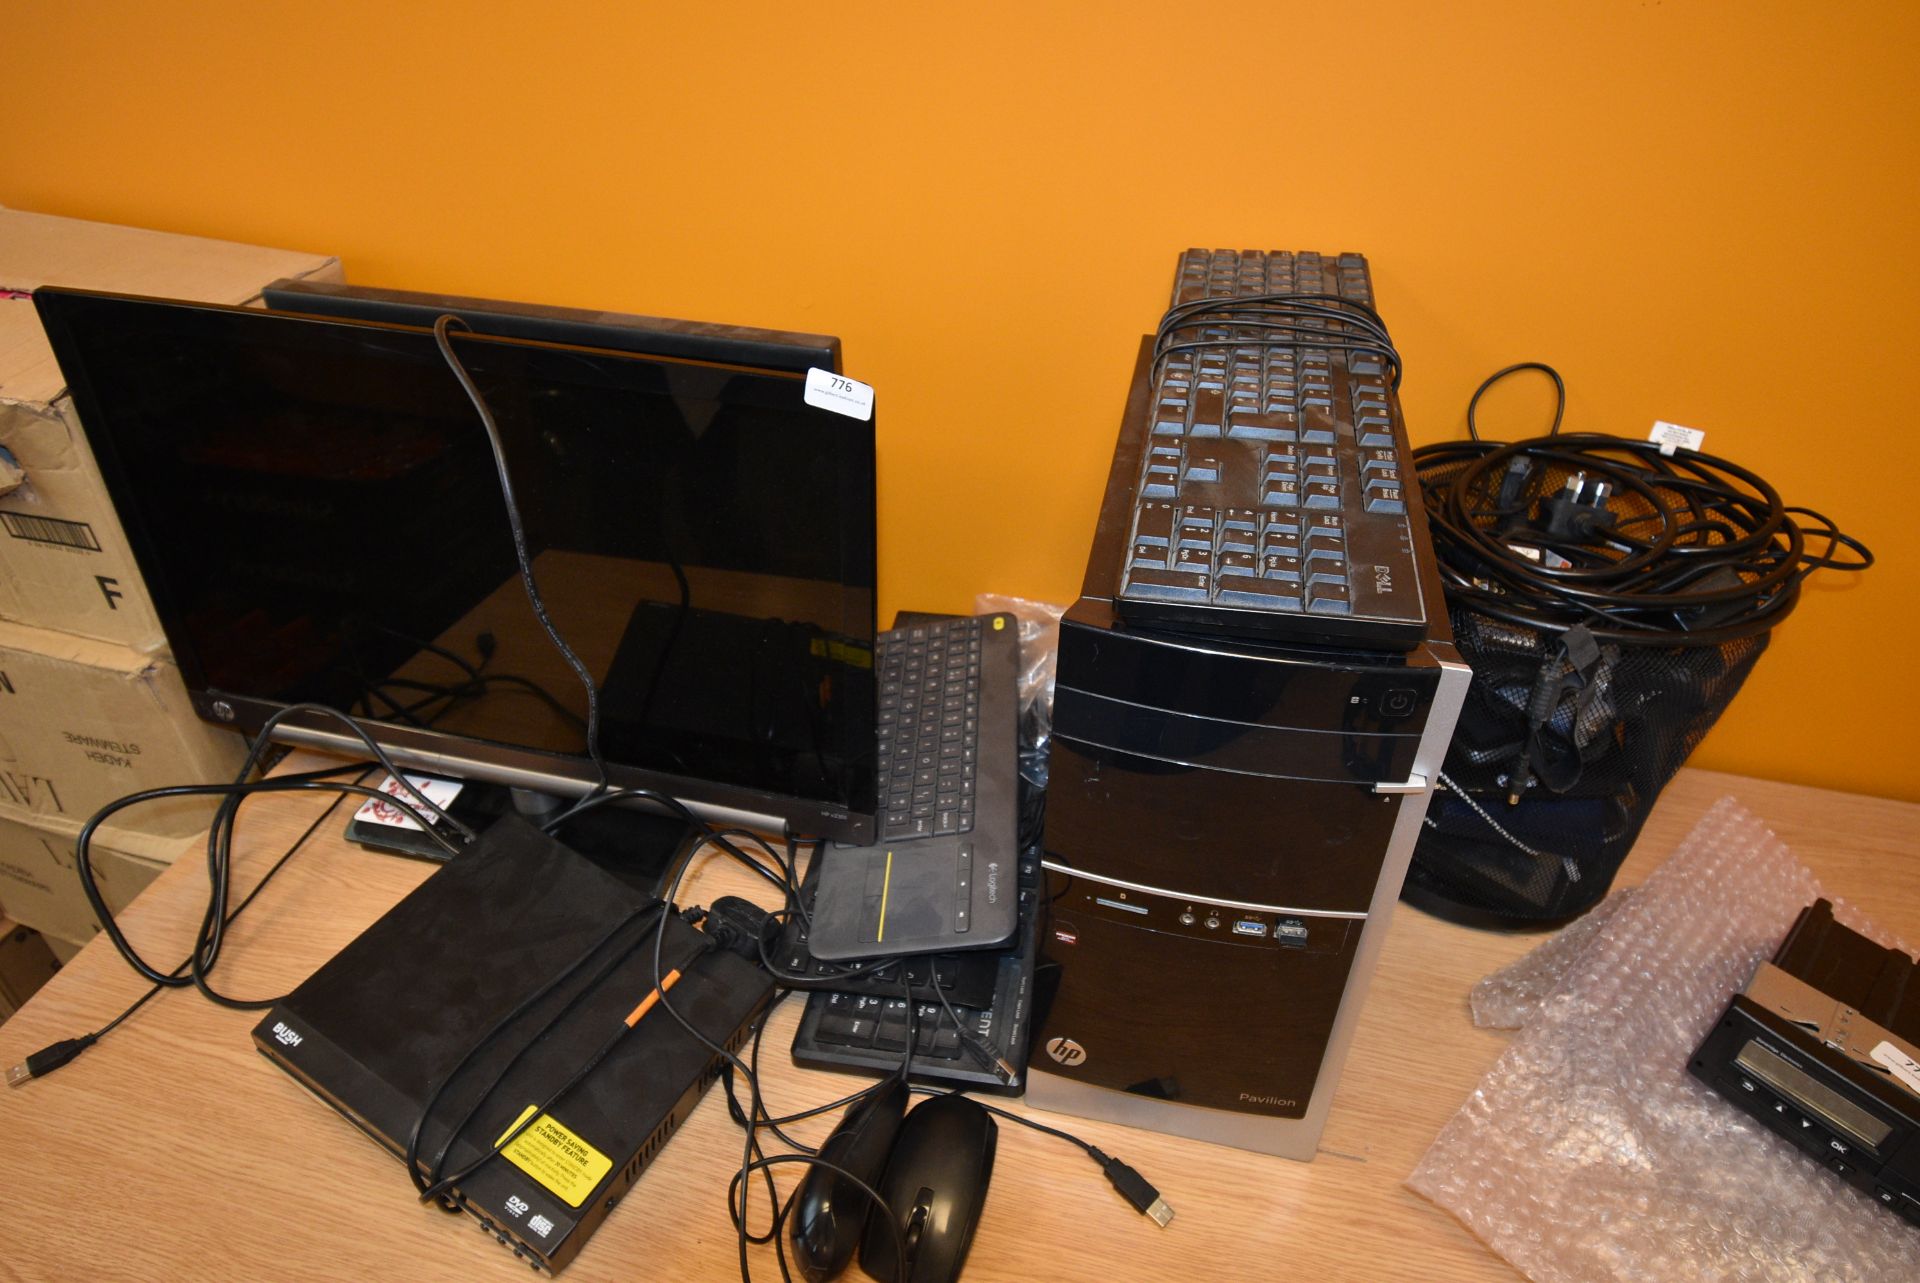 *Assorted Computer and IT Equipment Including Two Monitors, Tower, Keyboards, Power Supplies, etc.